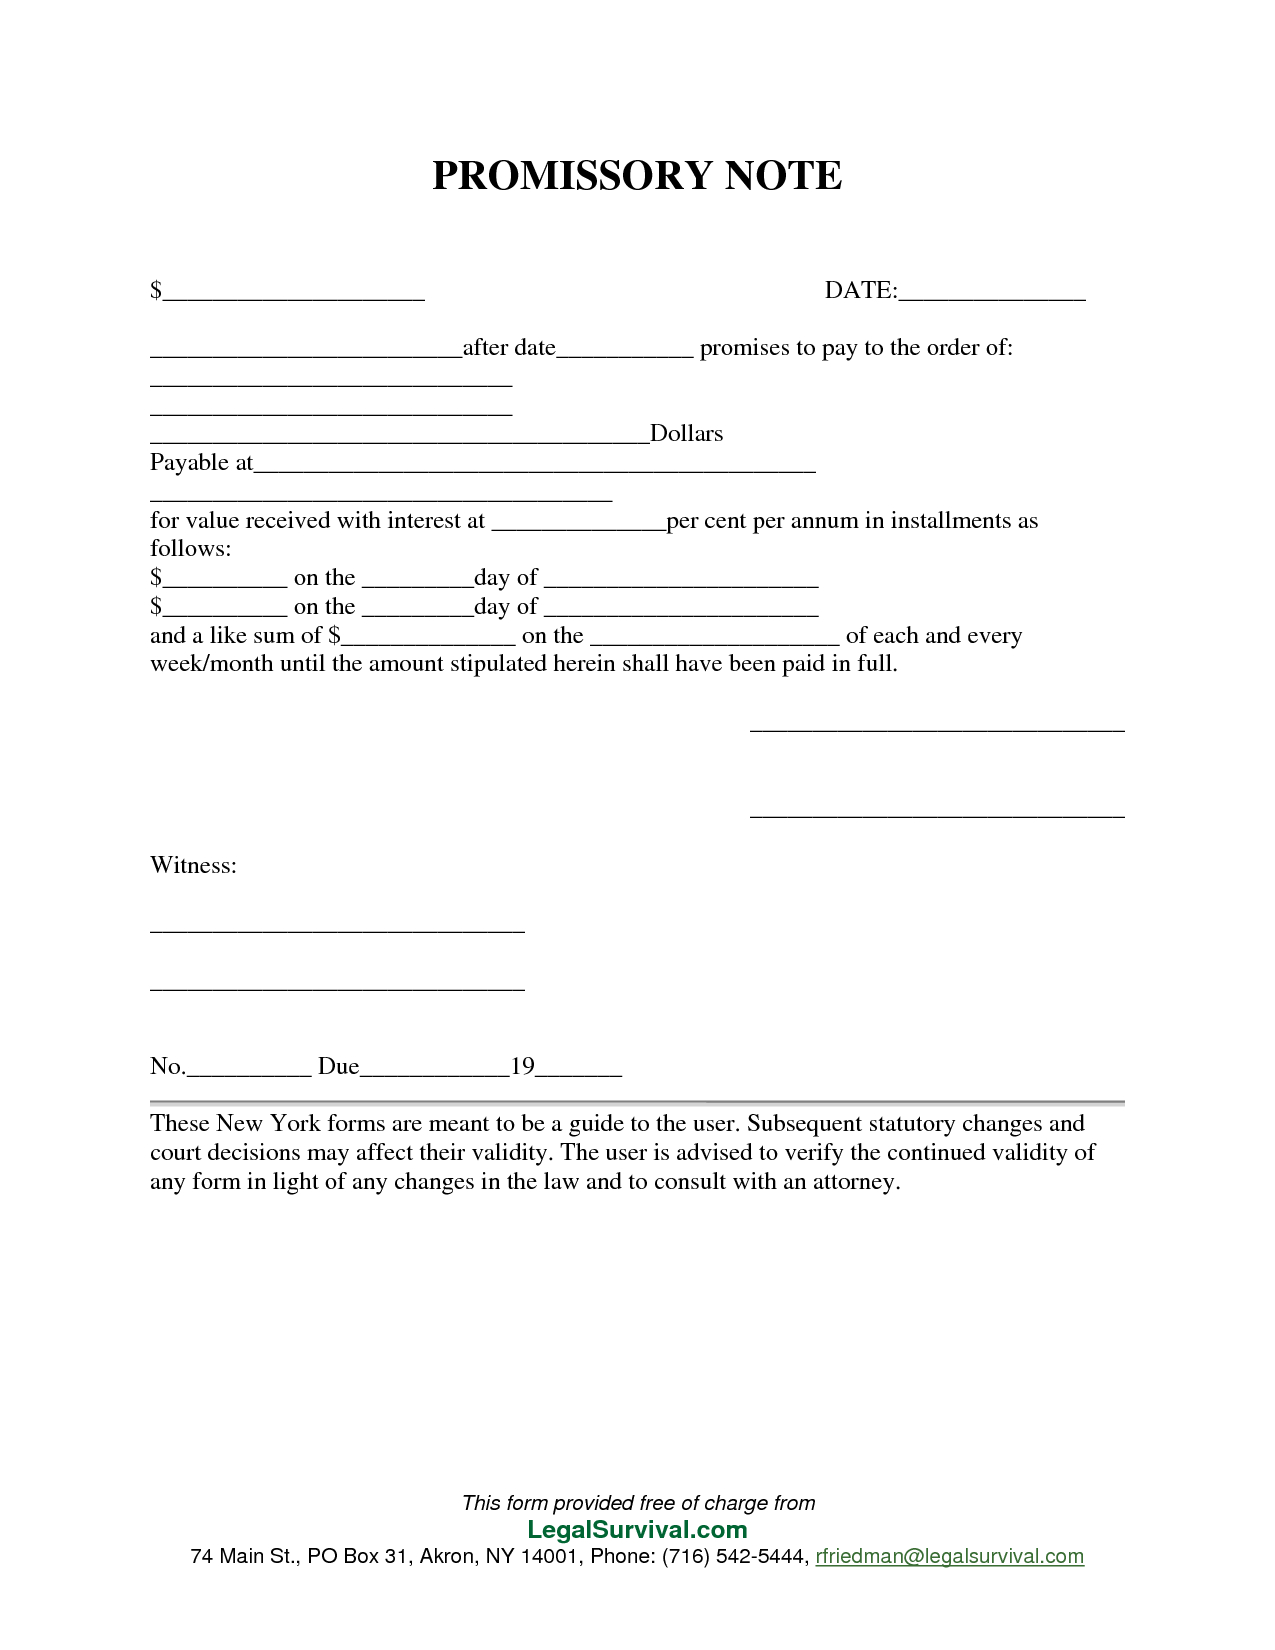 Permalink To Free Promissory Note Template | Templates, Printables - Free Promissory Note Printable Form